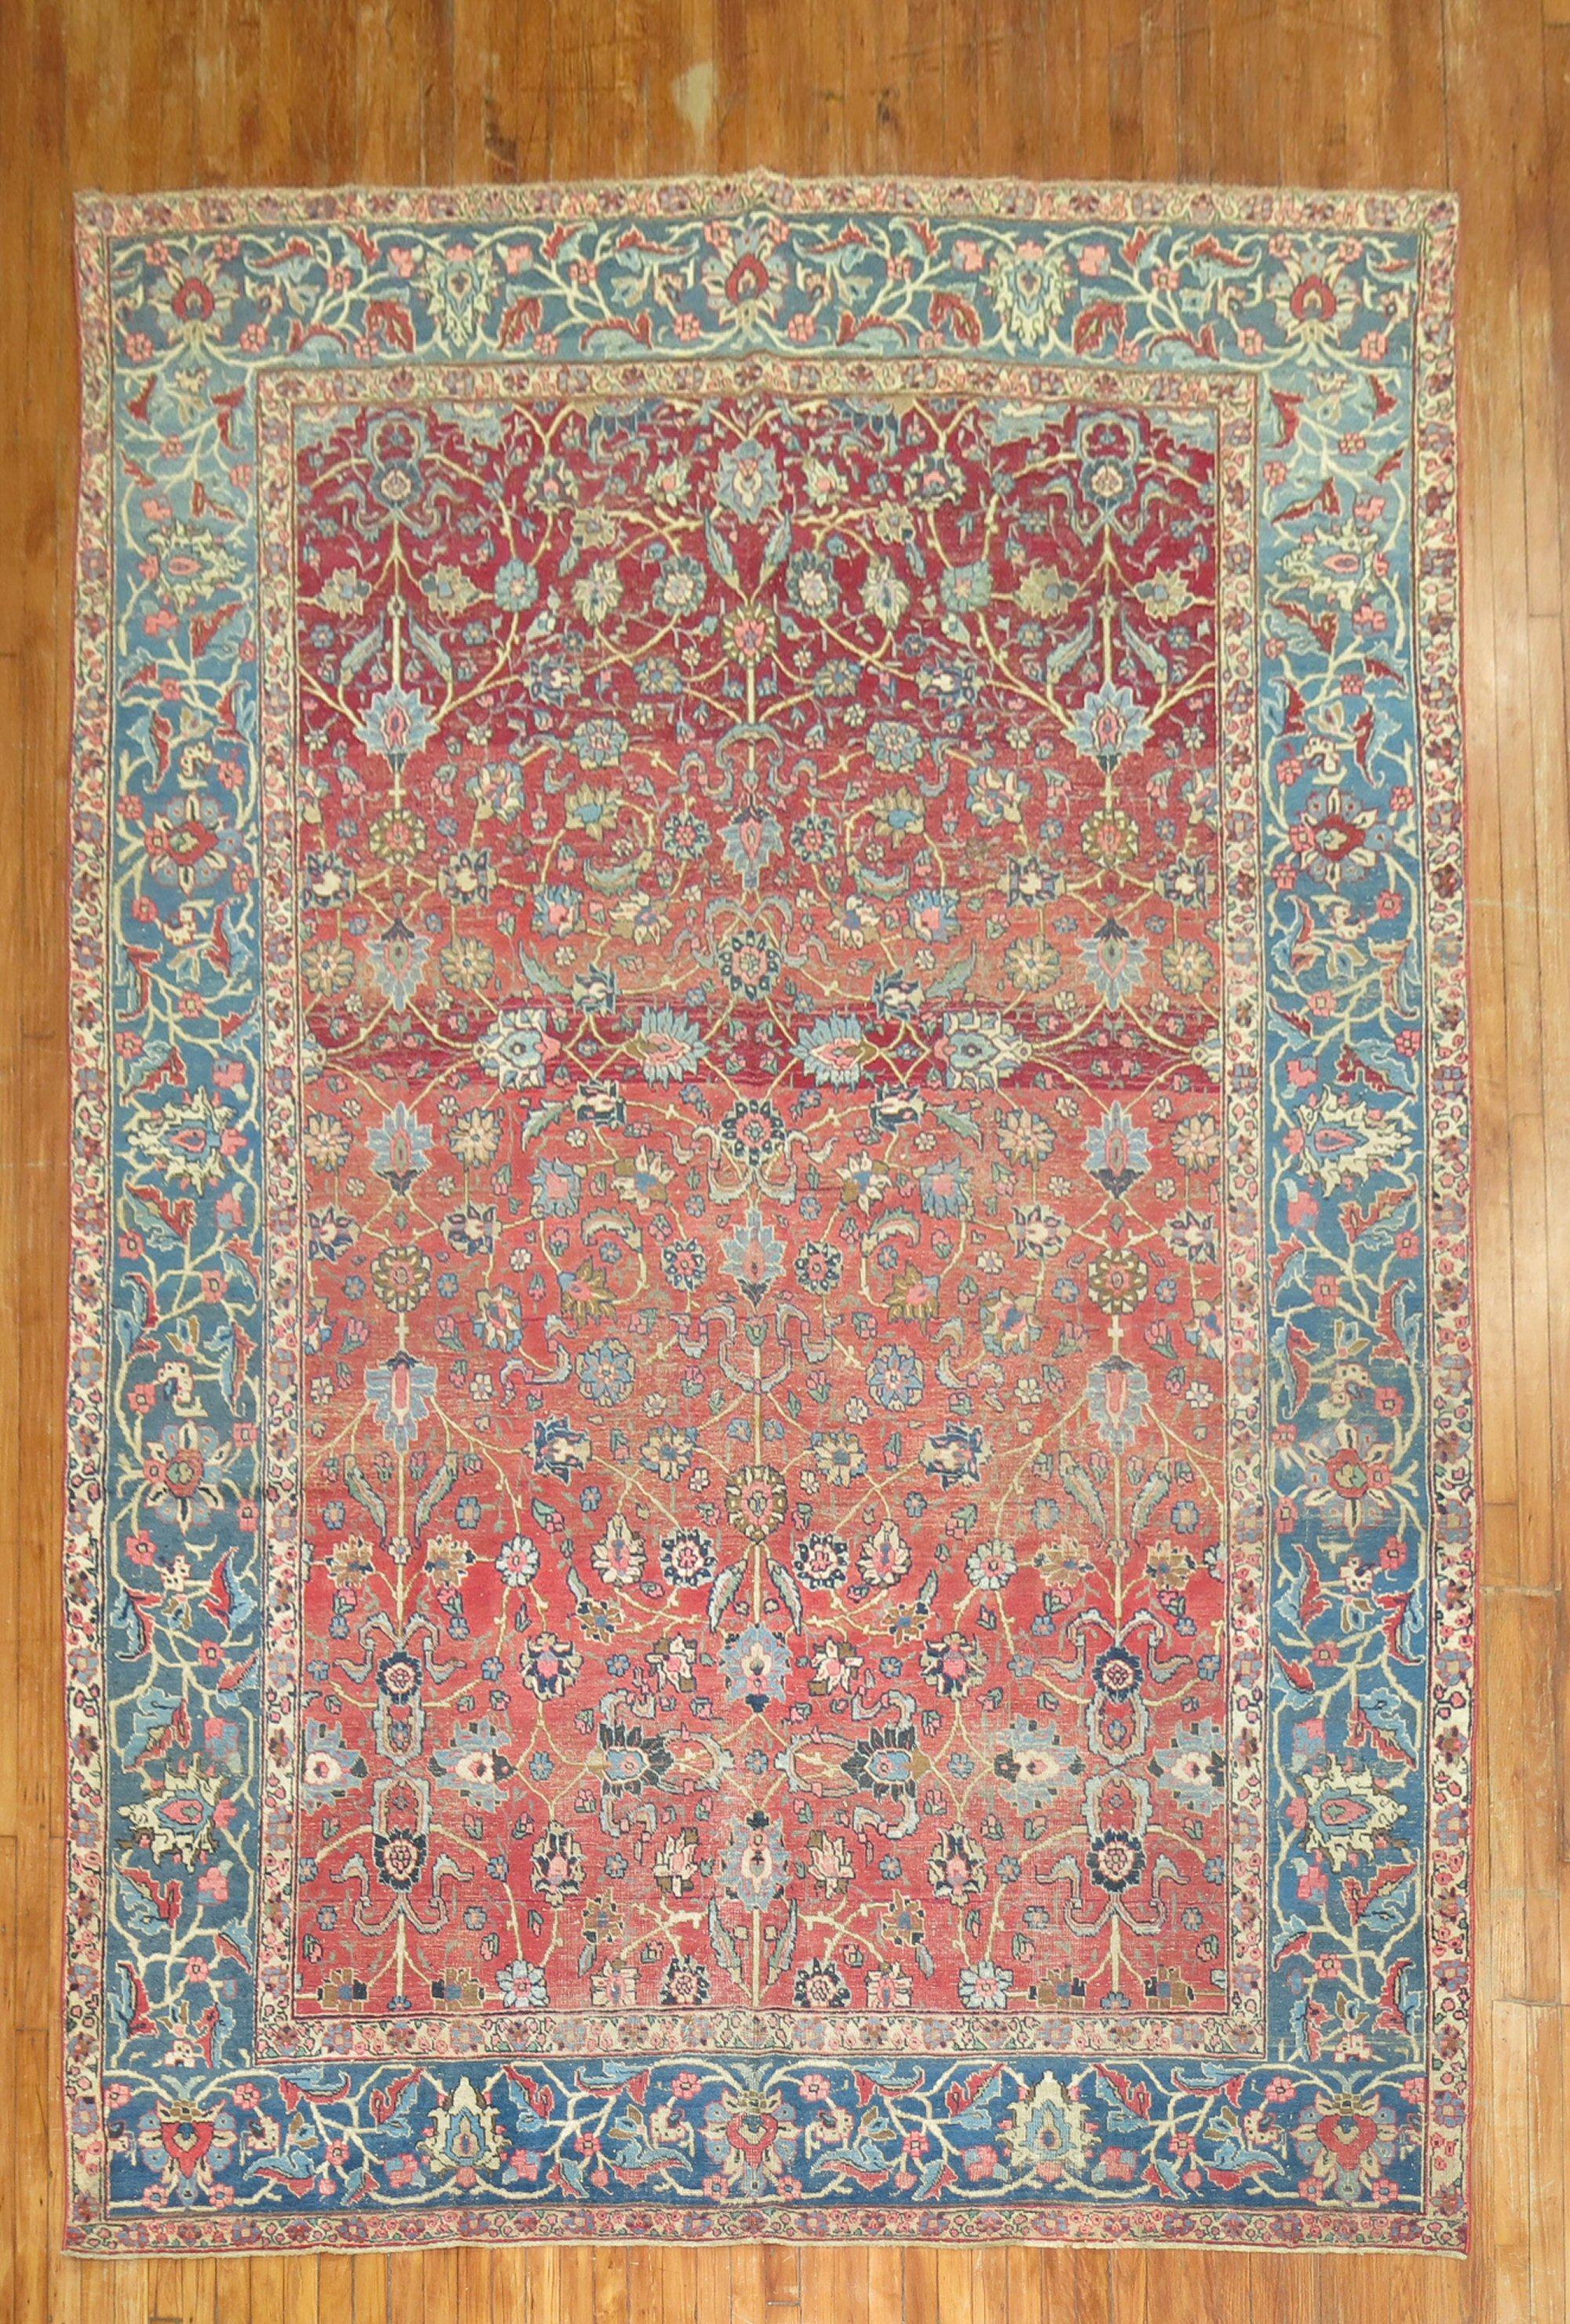 An early 20th-century room size Persian Tabriz small room size rug

Measures: 7'11'' x 11'